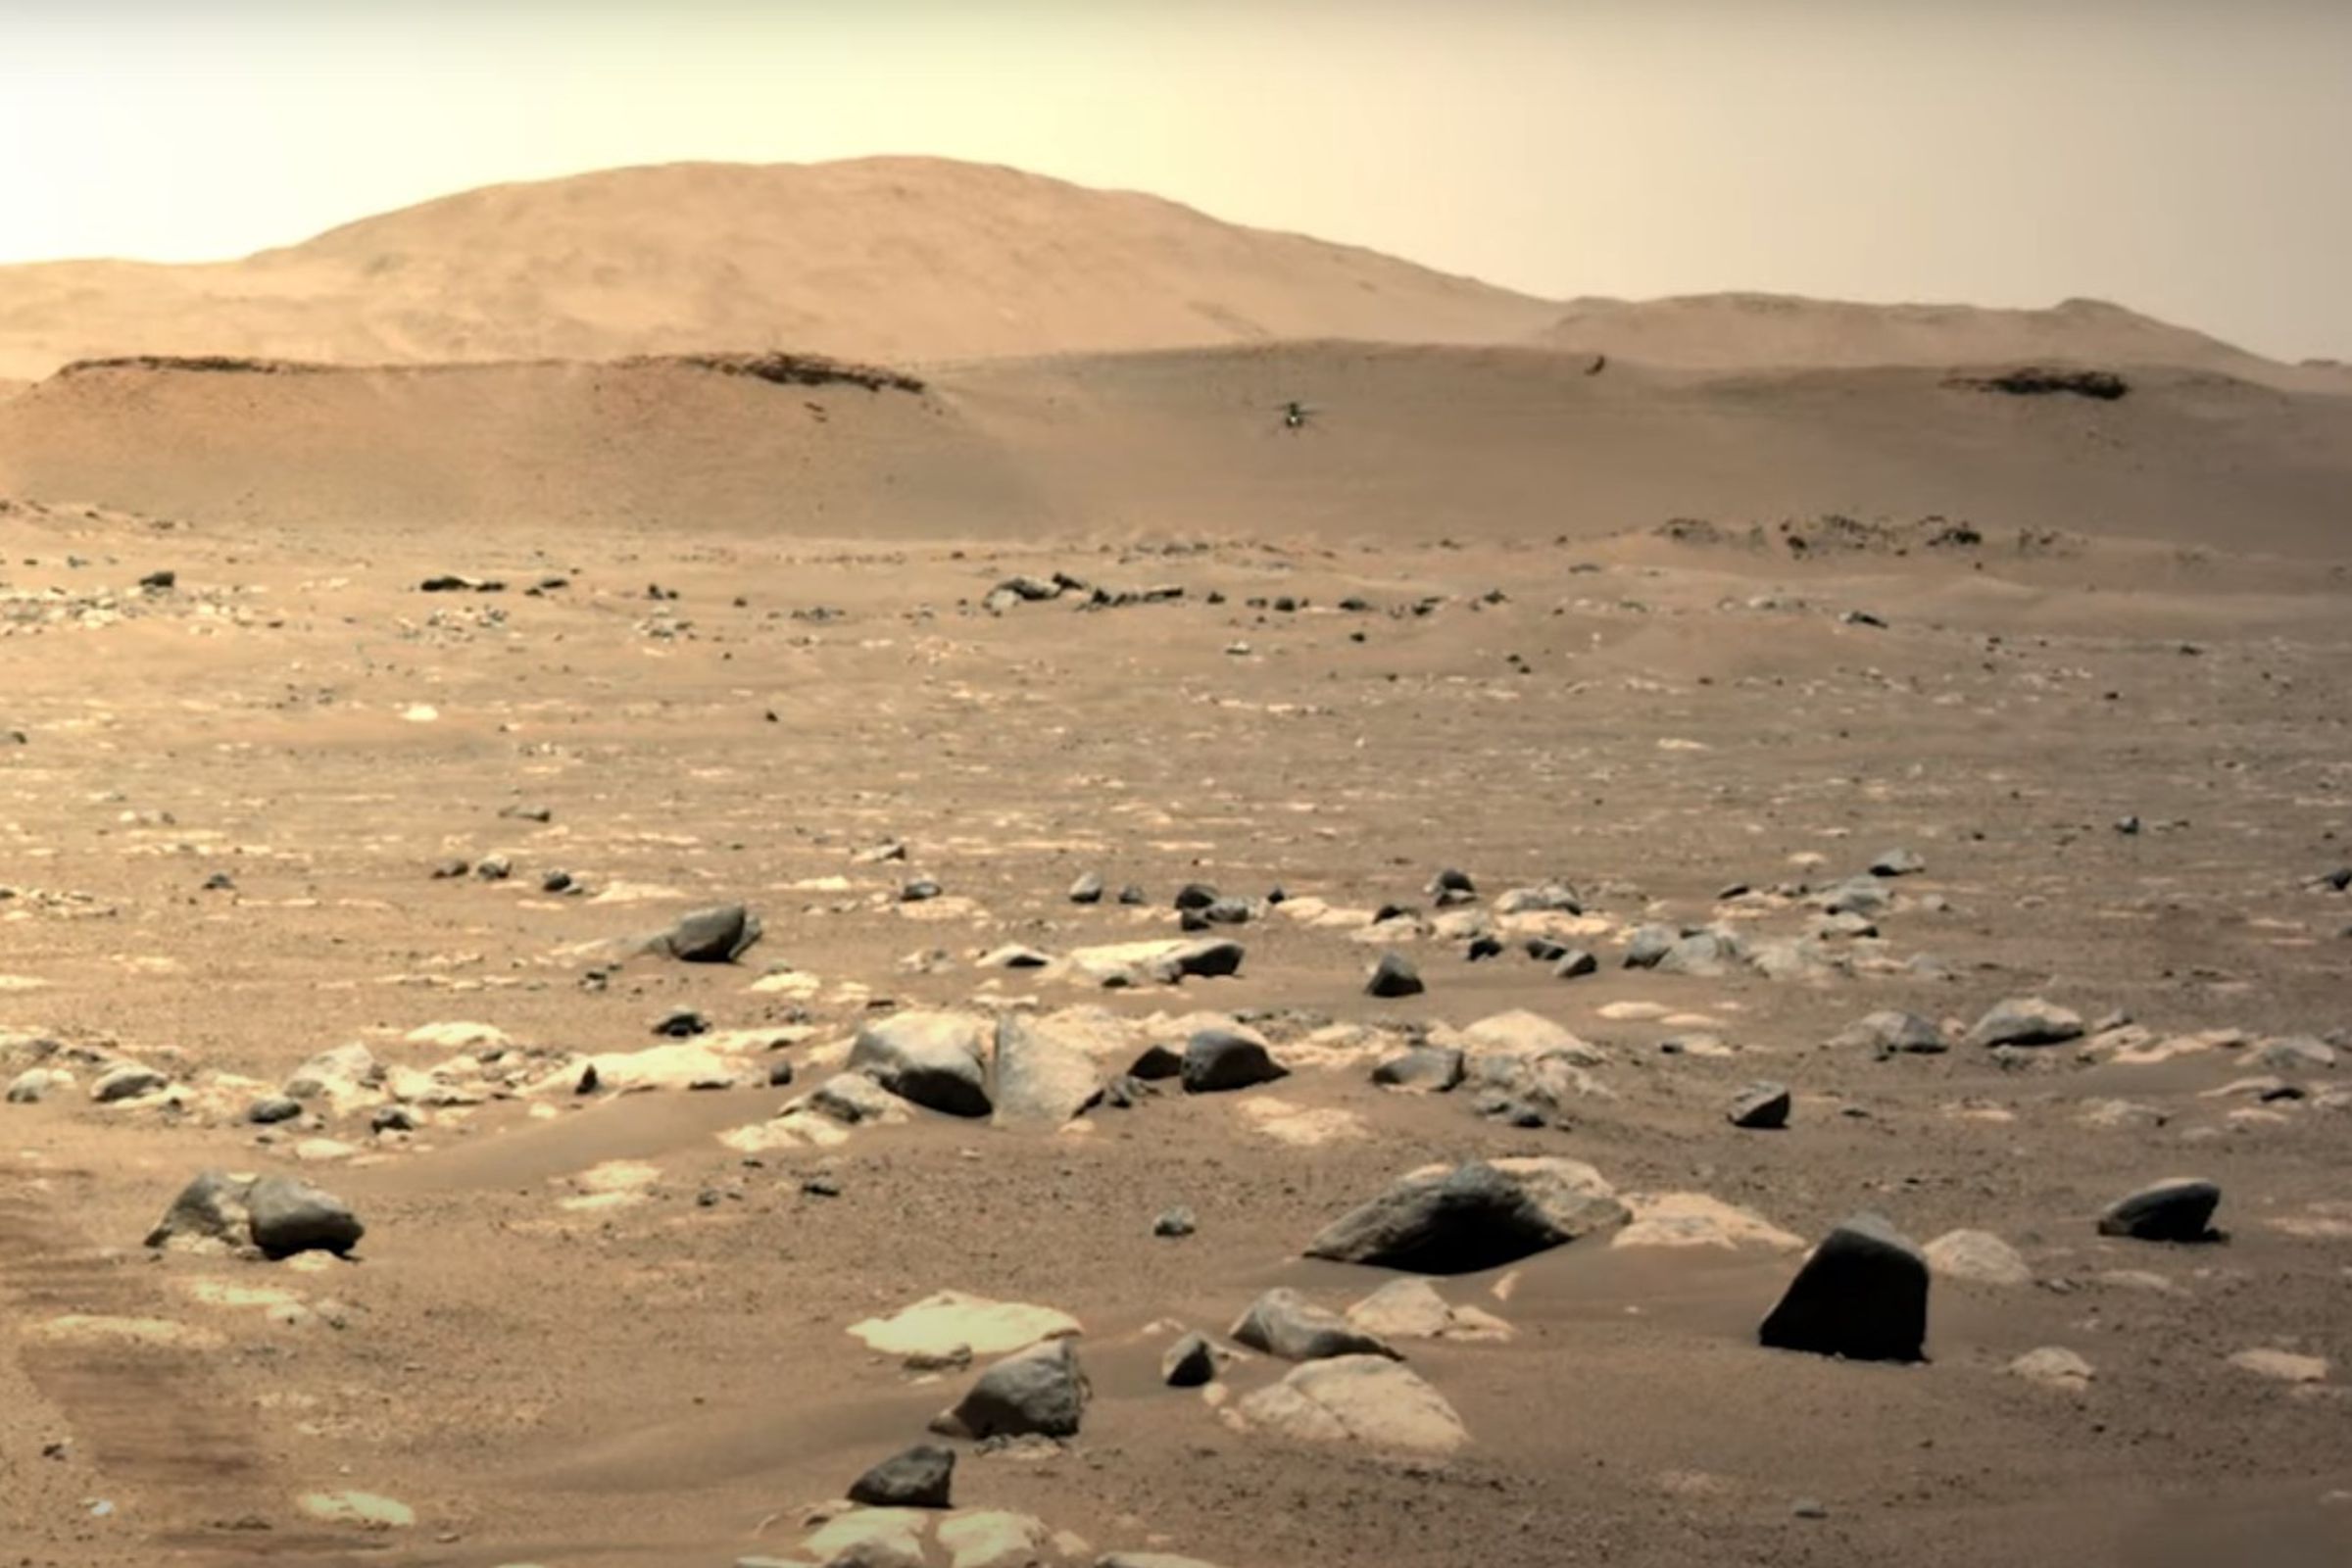 Ingenuity lifts off from the Martian surface